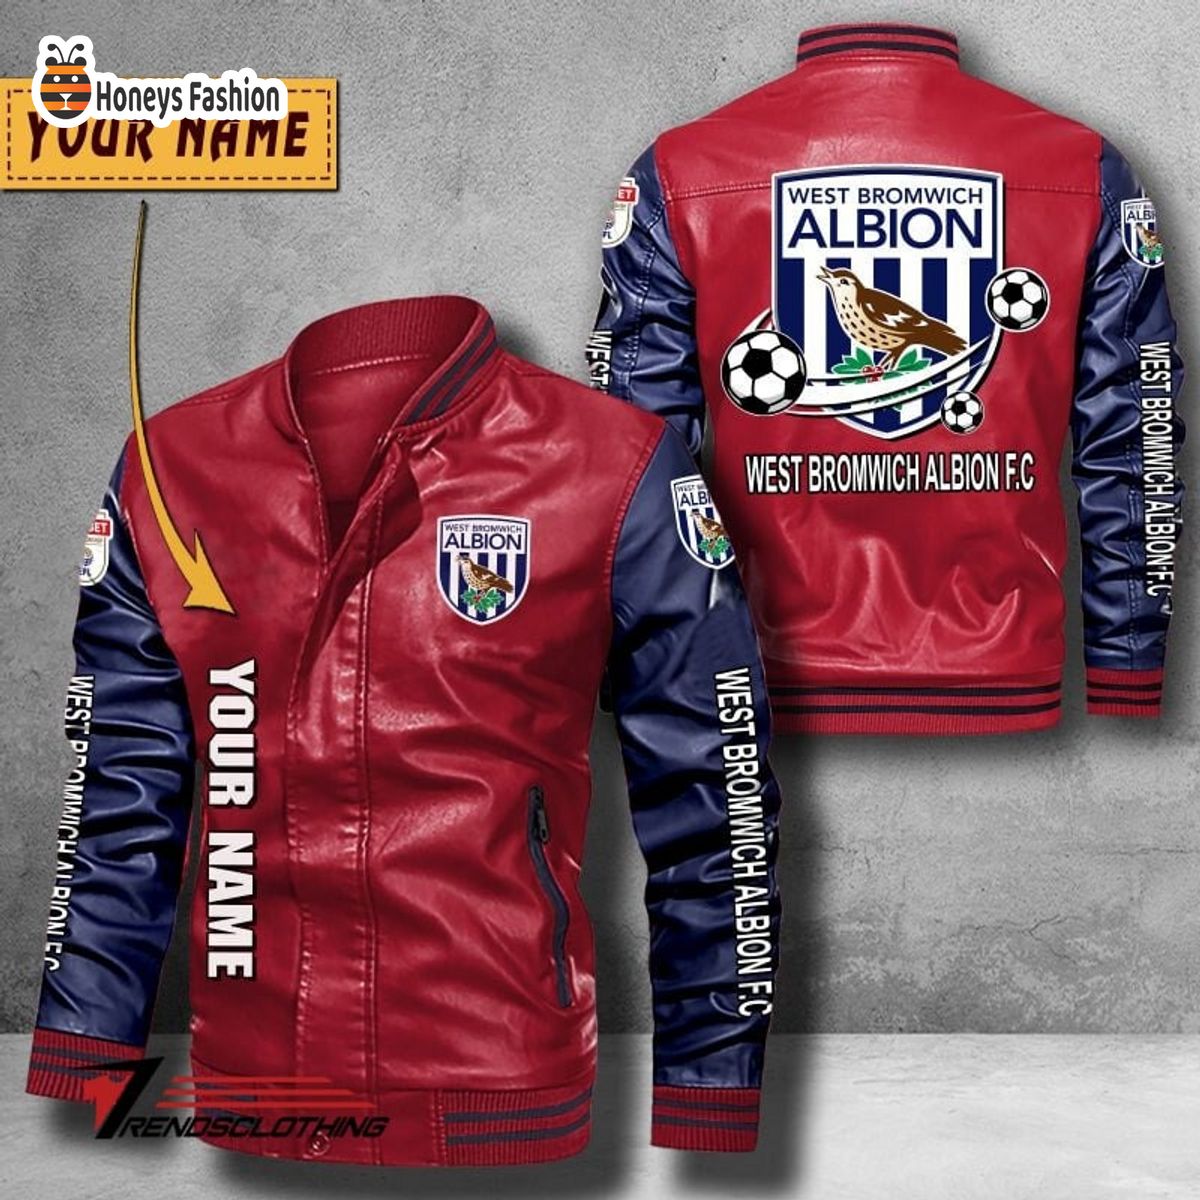 West Bromwich Albion F.C Custom Name Leather Bomber Jacket